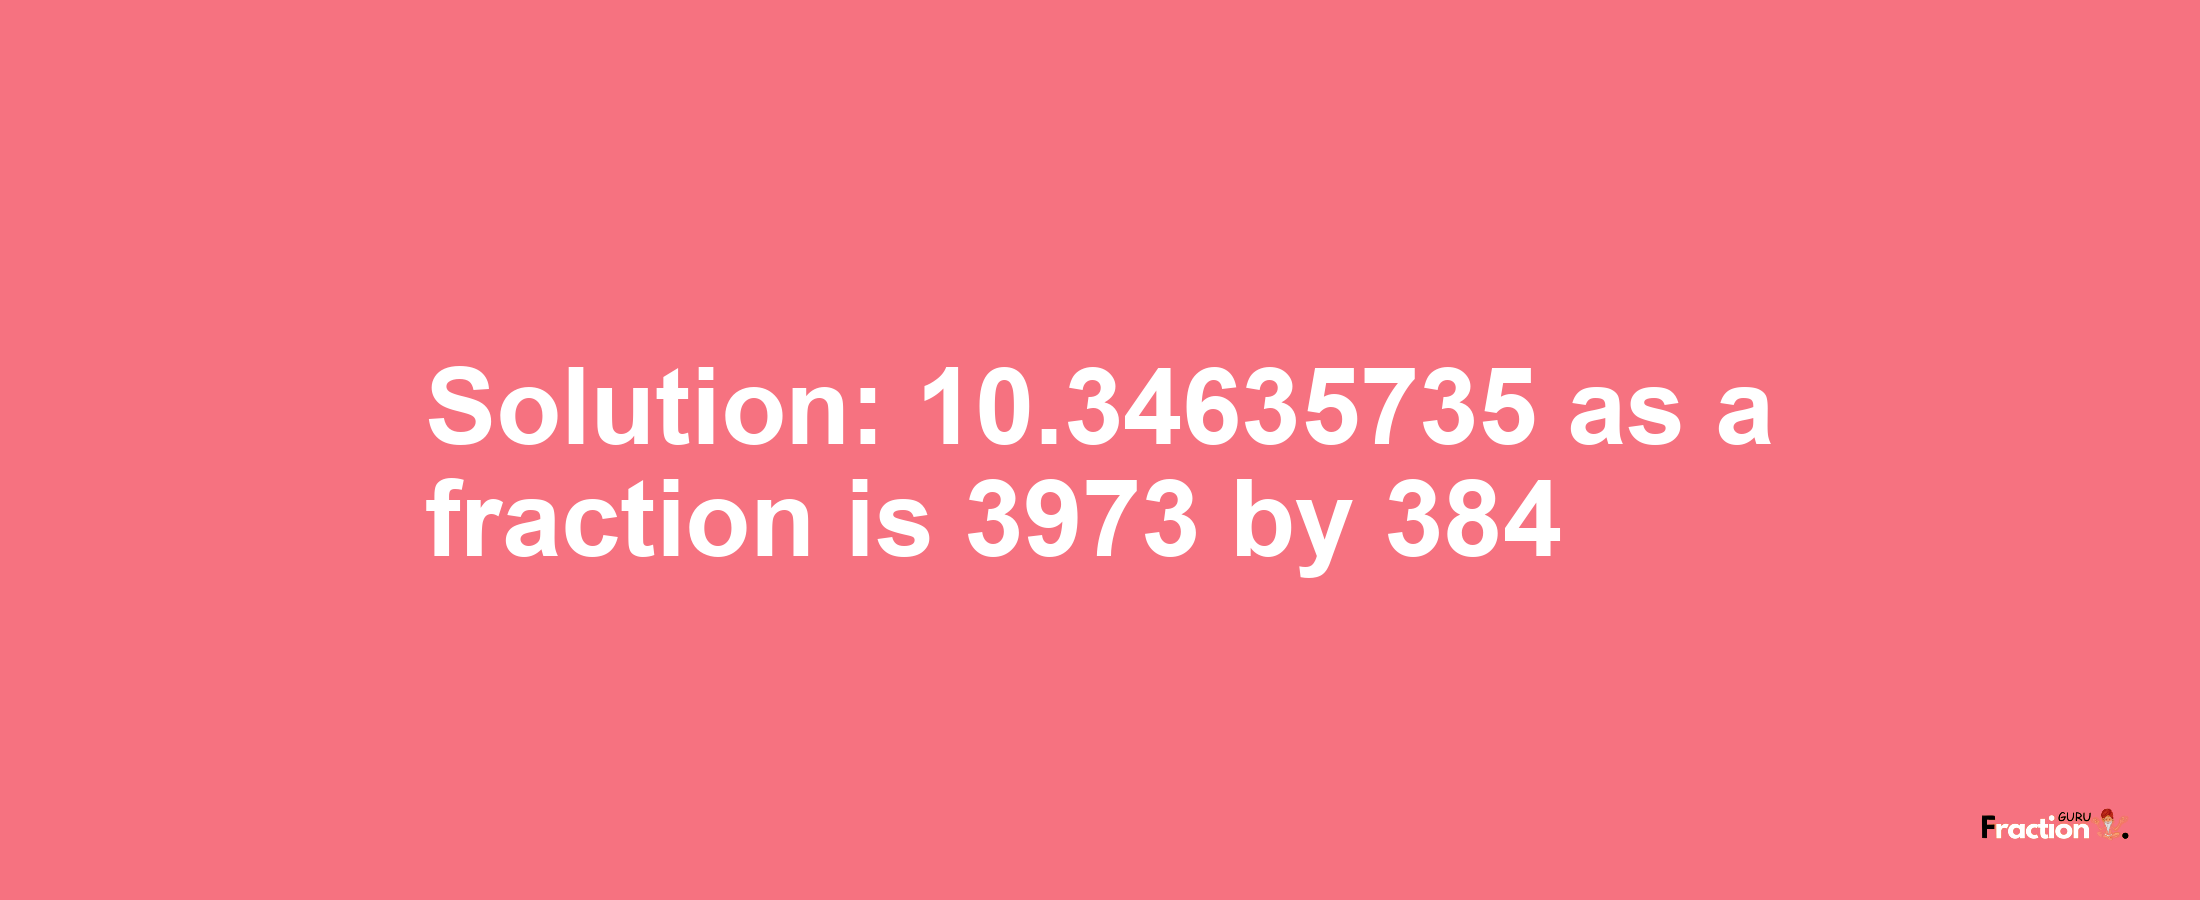 Solution:10.34635735 as a fraction is 3973/384